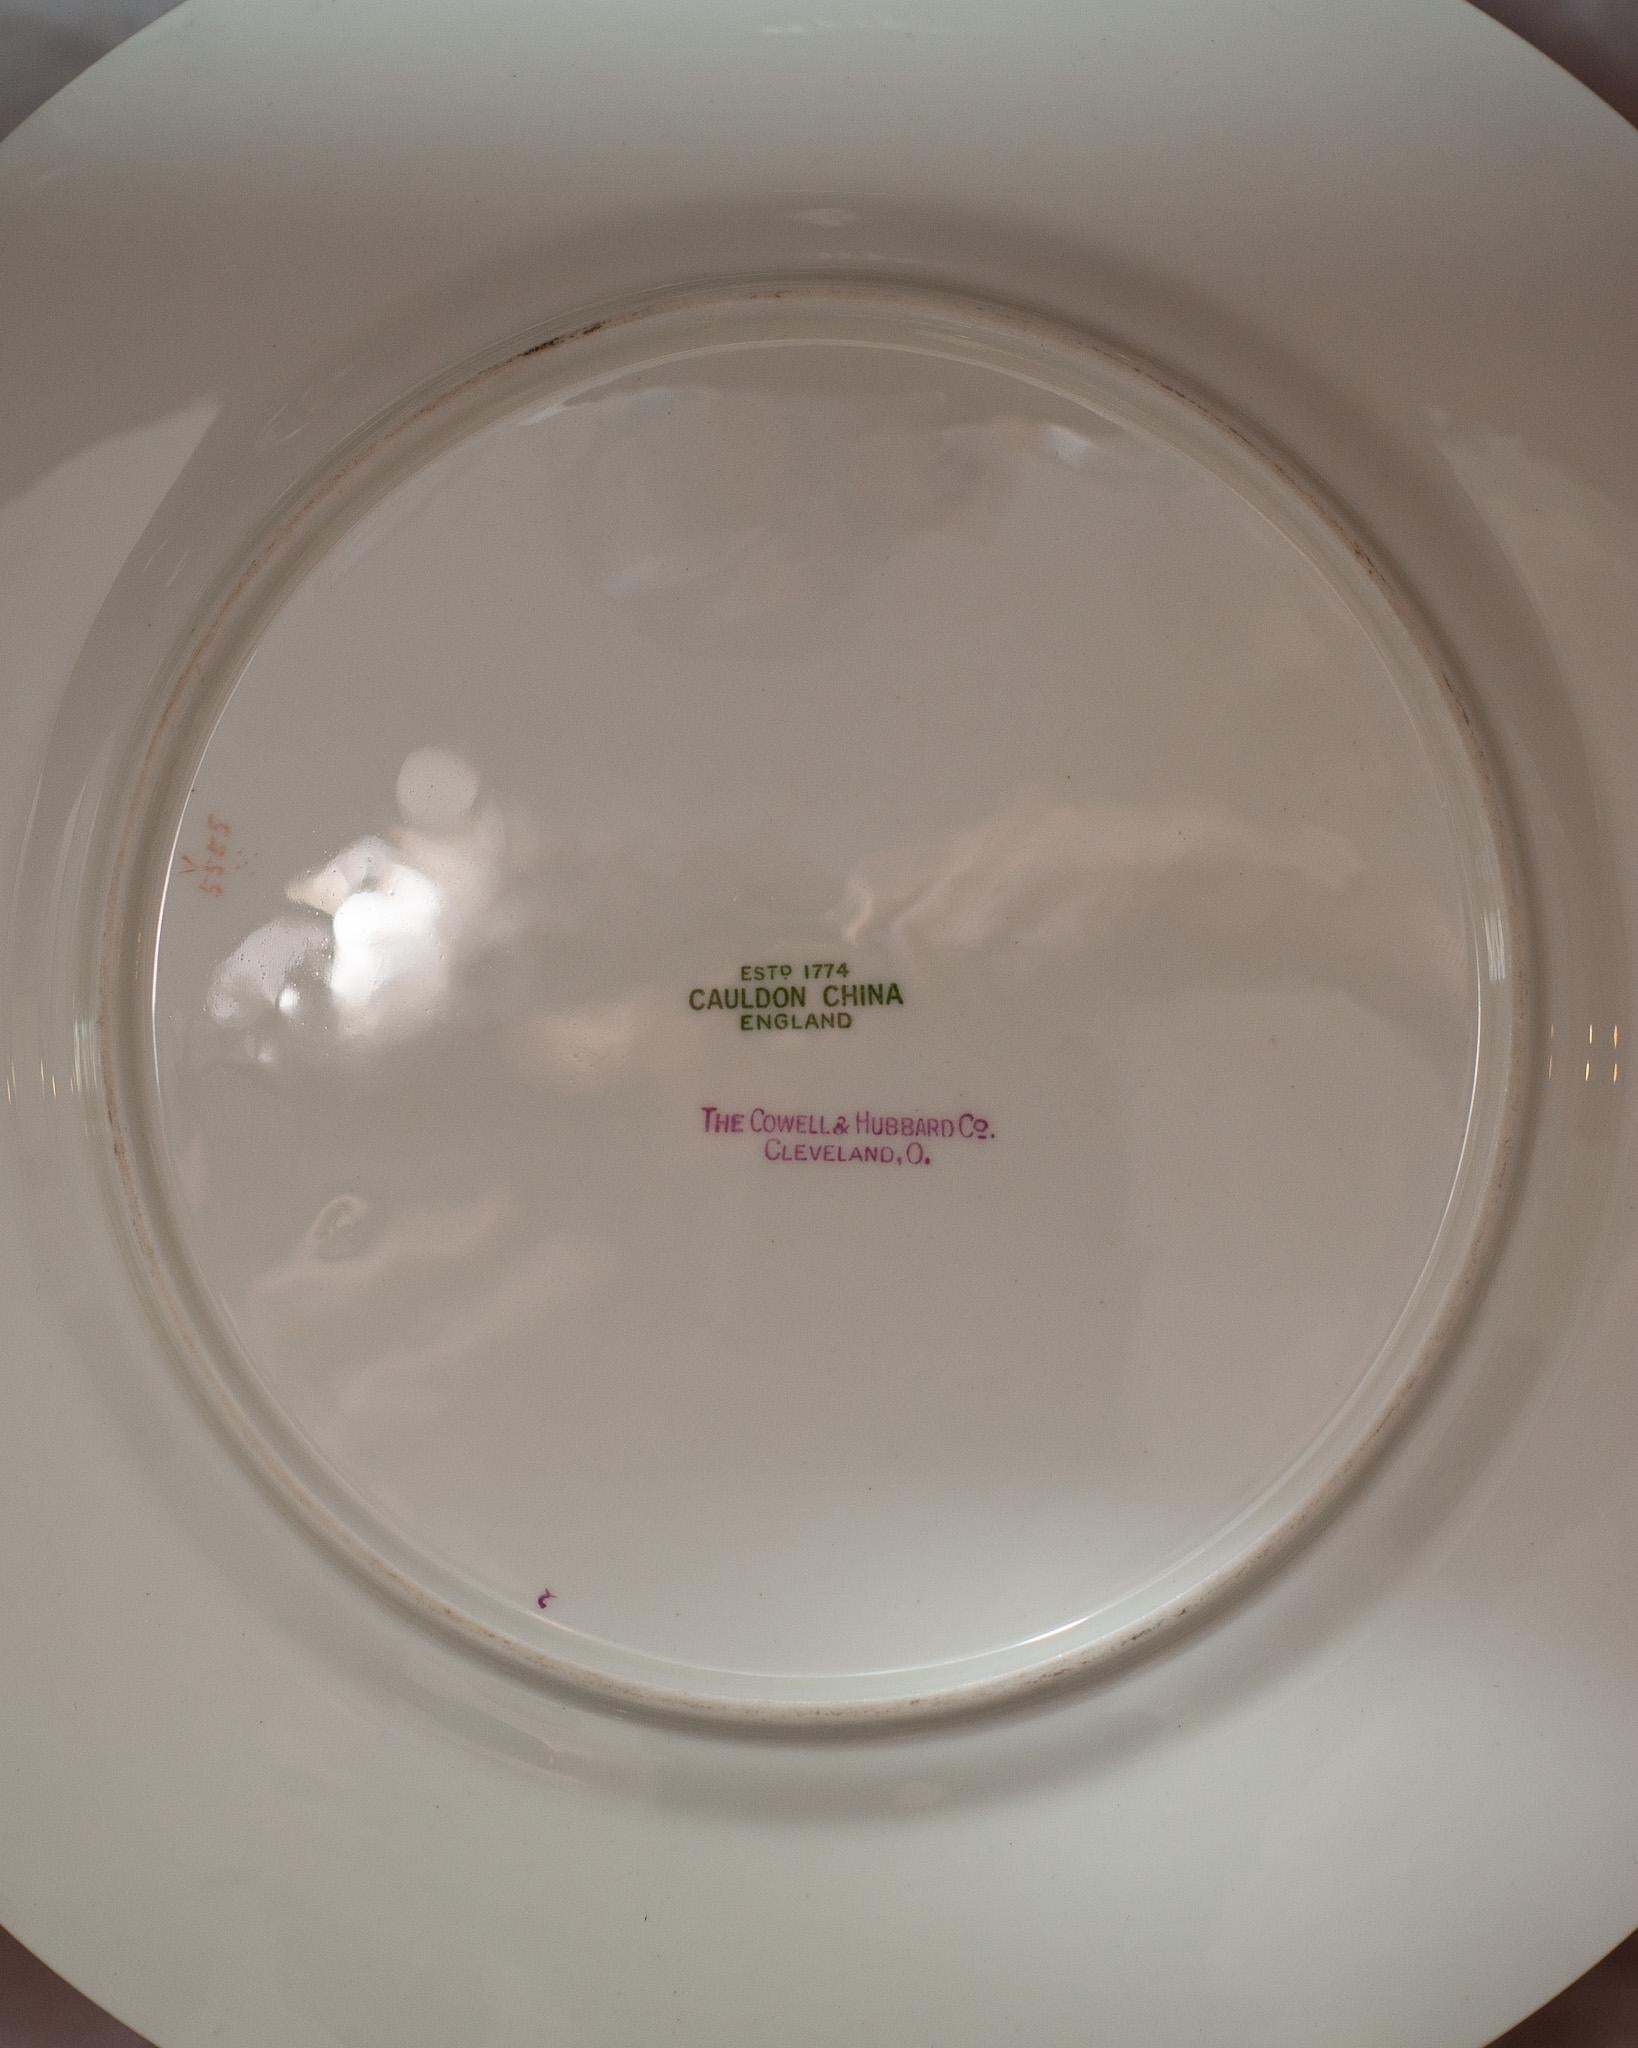 Antique Set of 12 Golden Cauldon Dinner Plates for Cowell & Hubbard Co, Ohio In Good Condition For Sale In Toronto, ON